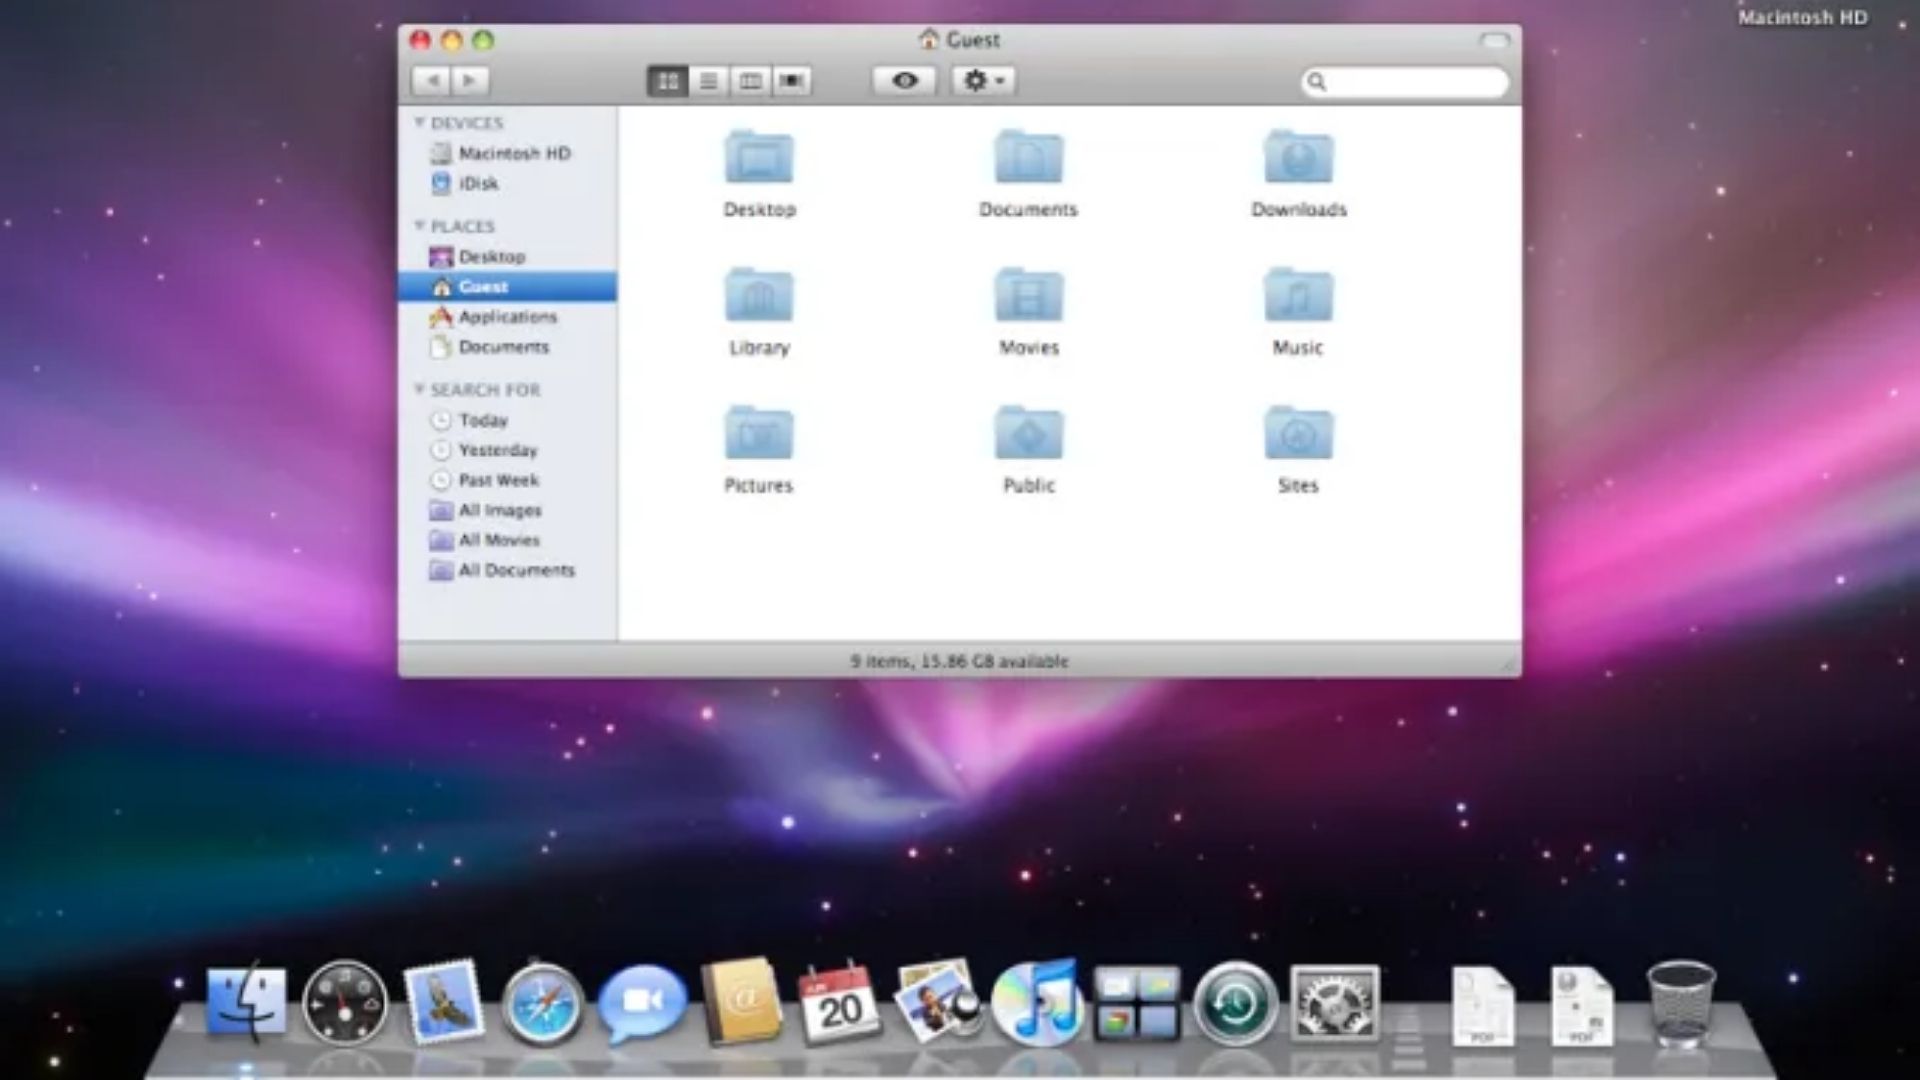 Download software for Mac